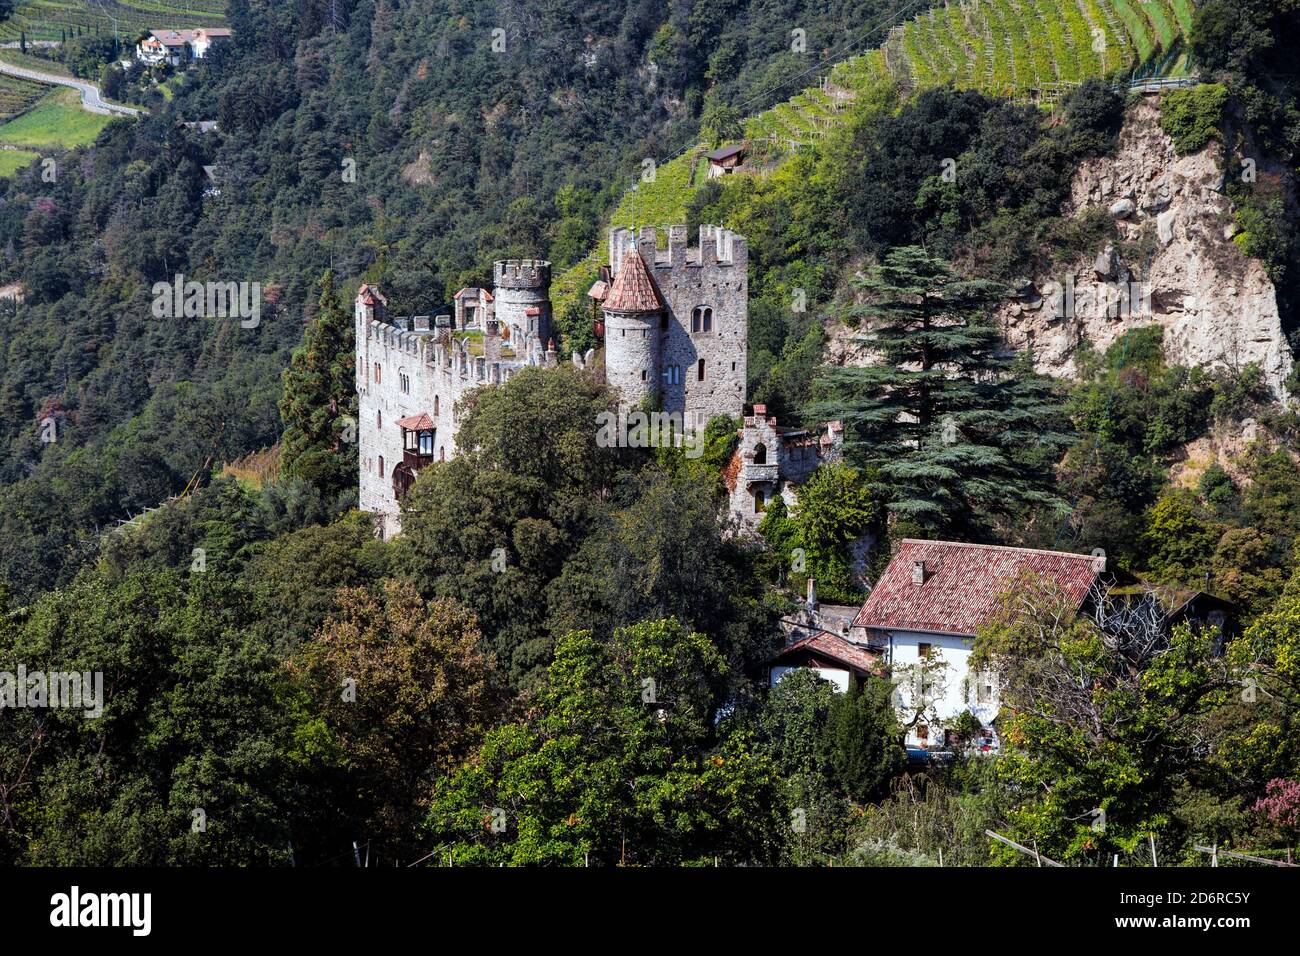 The Brunnenburg castle in the town of Tirolo, Bolzano province, Italy. Stock Photo